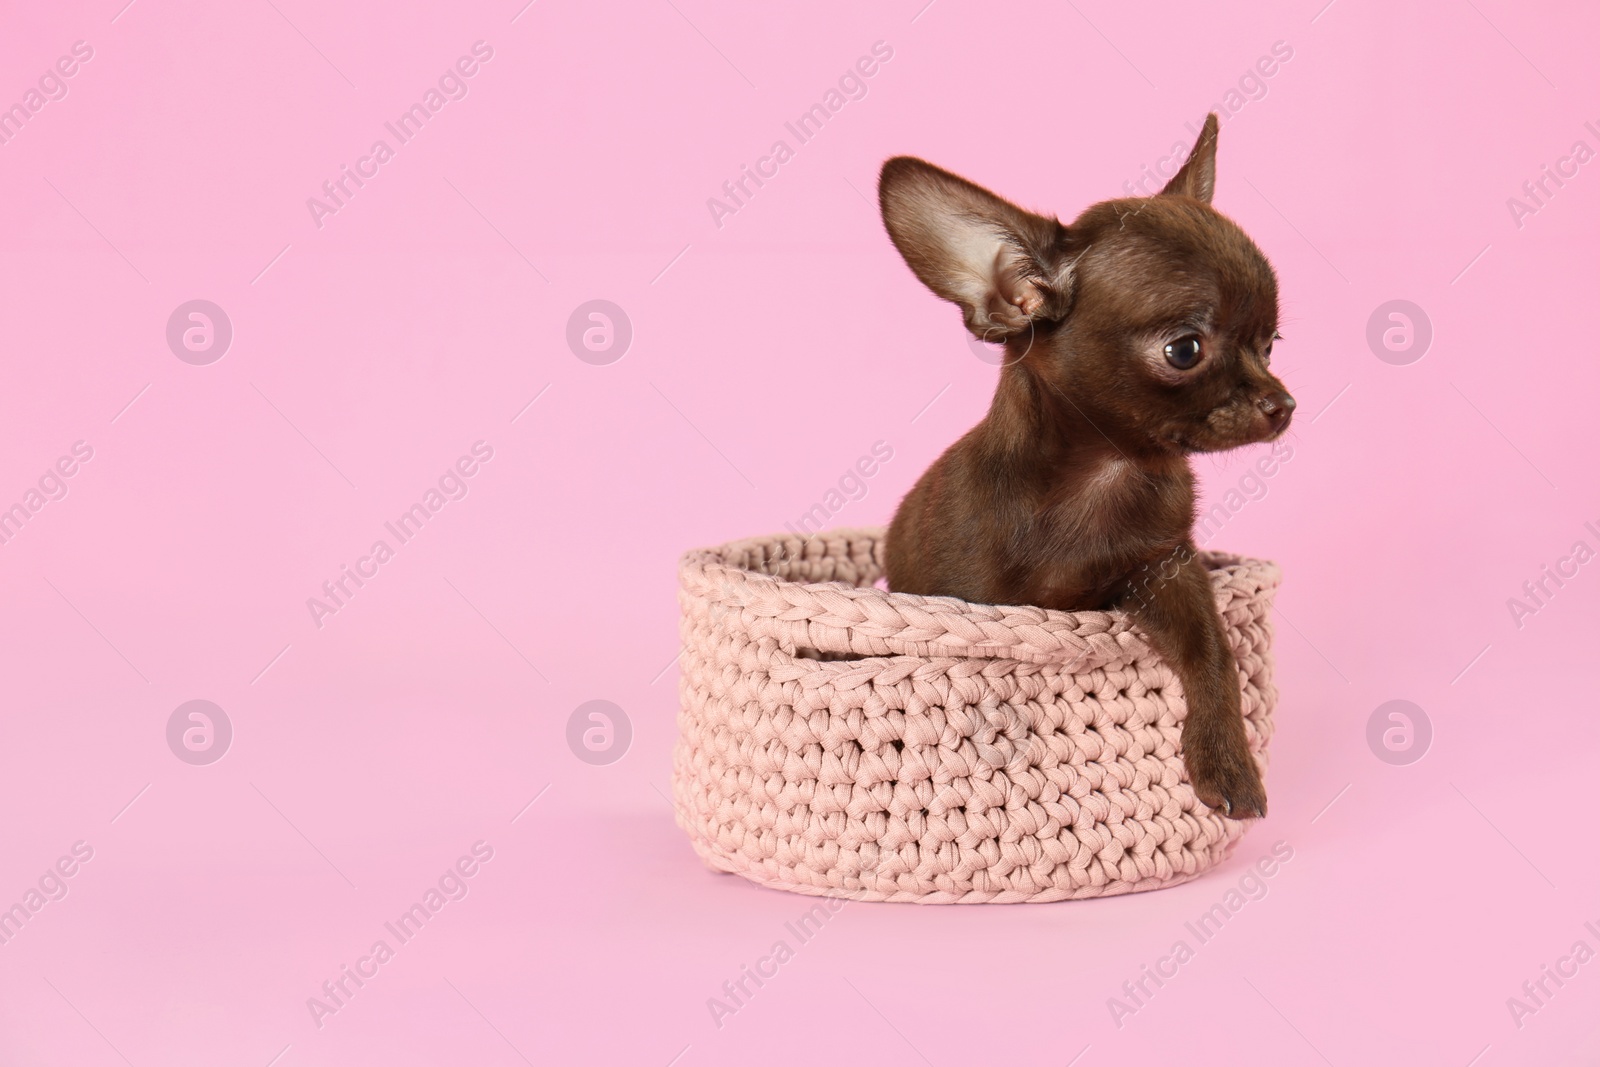 Photo of Cute small Chihuahua dog in knitted basket on pink background. Space for text